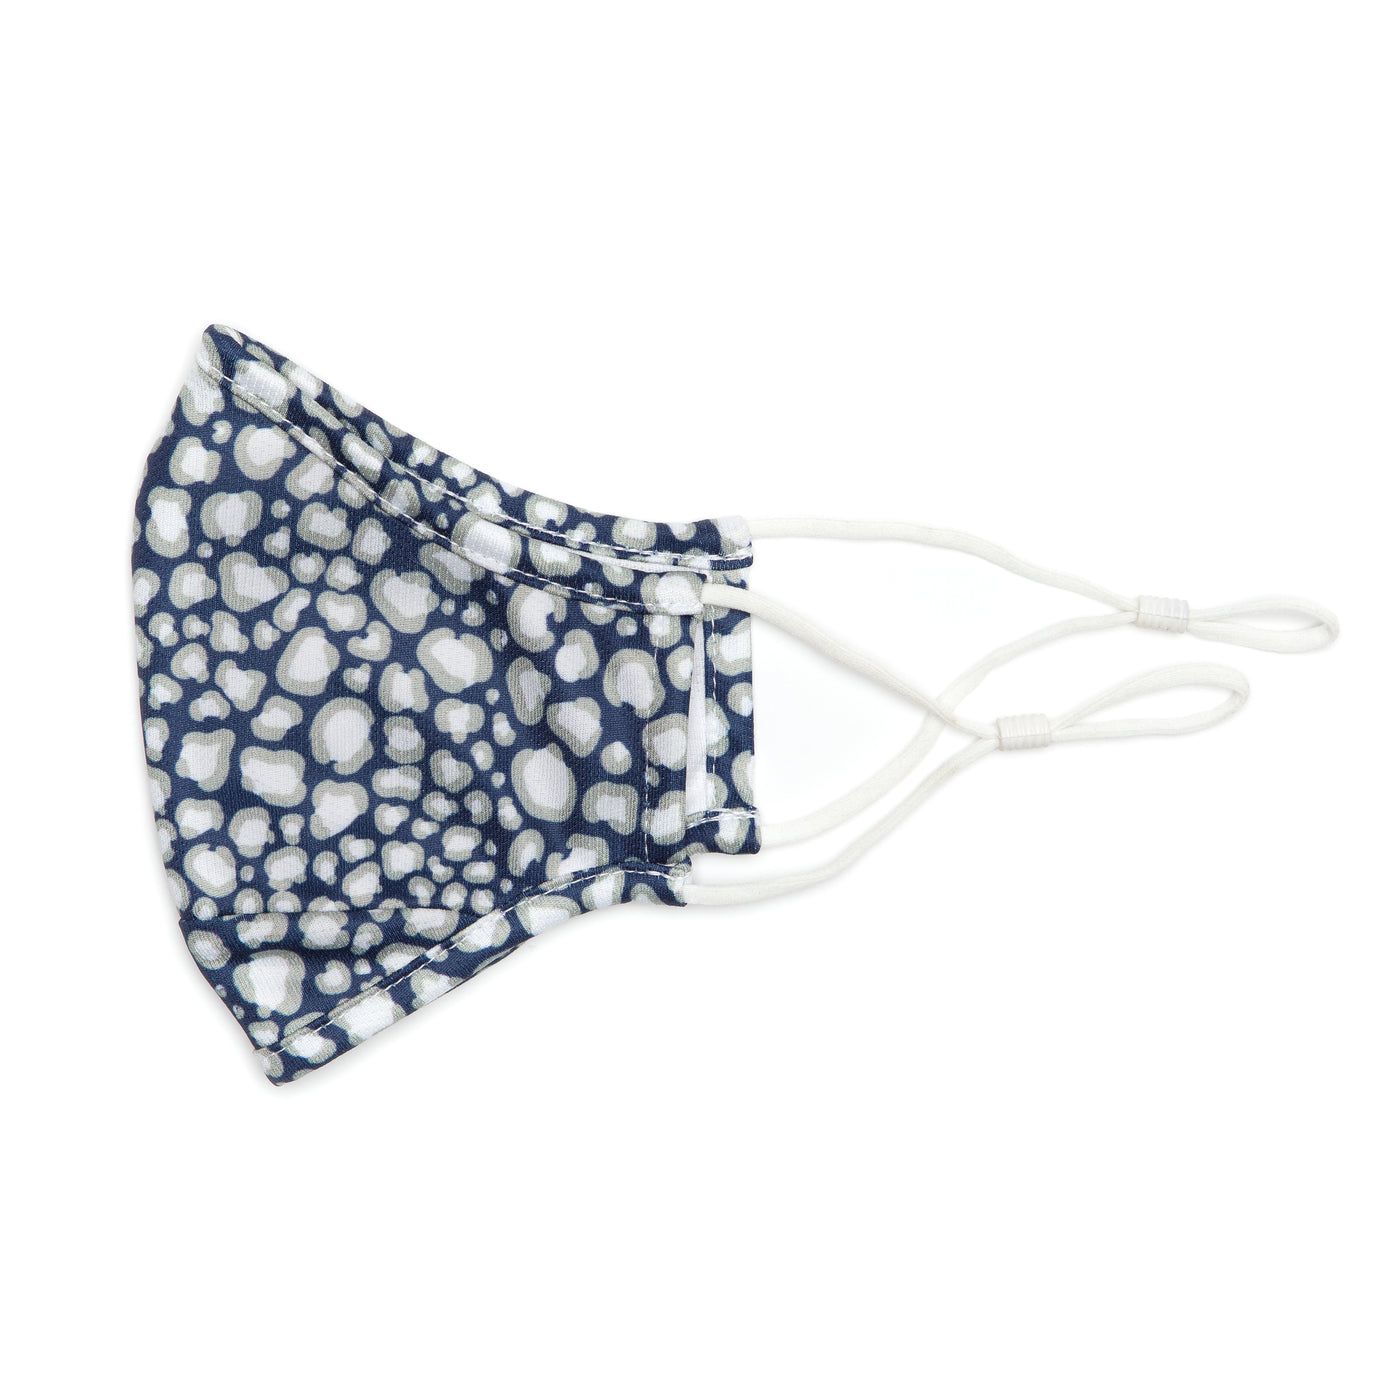 navy and grey leopard pattern face mask